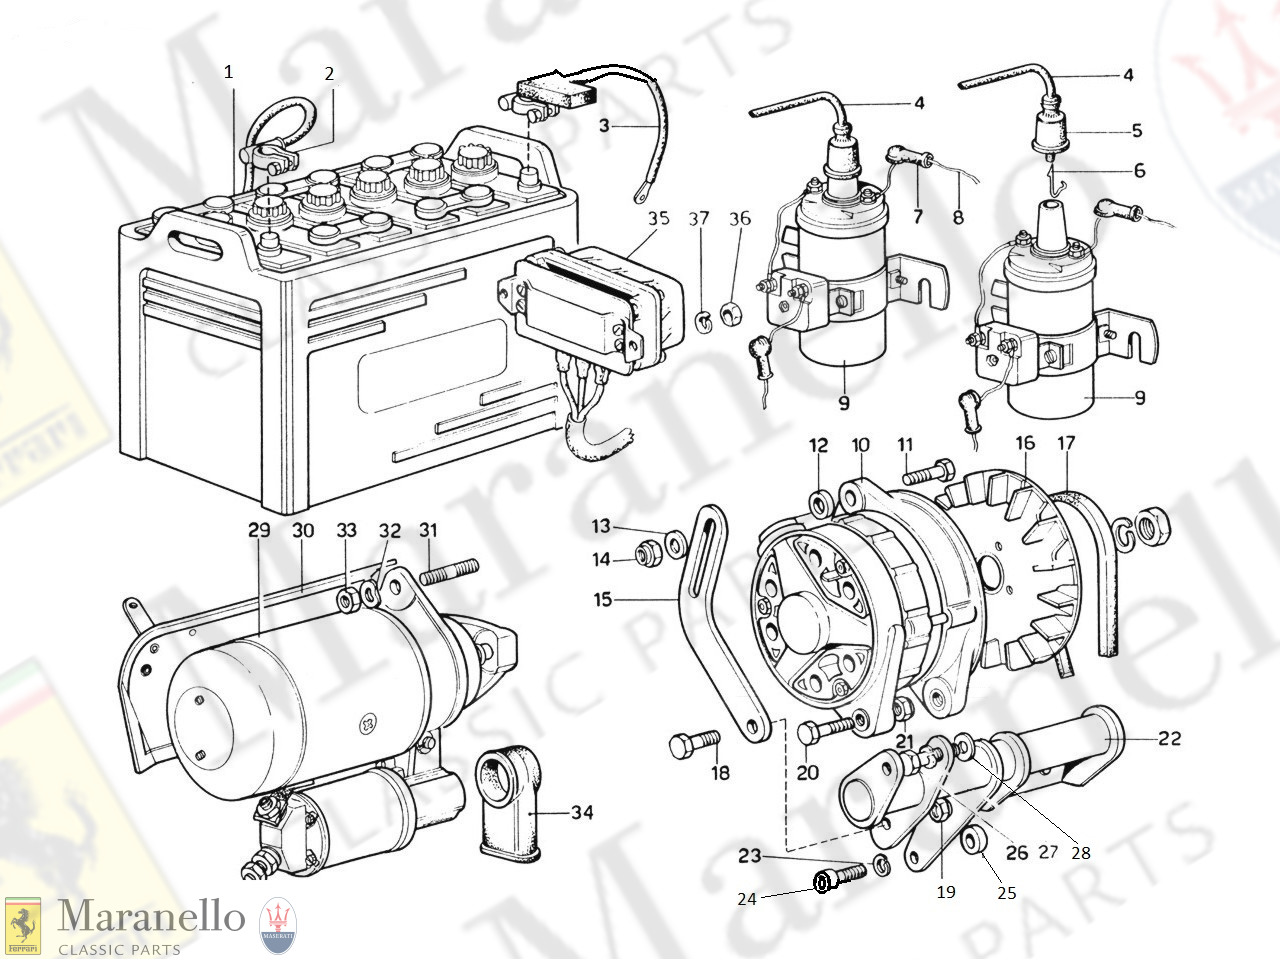 035A - Generator, Accumulator Coils & Starter (1974 Revision - Cars With Air Pollution System)